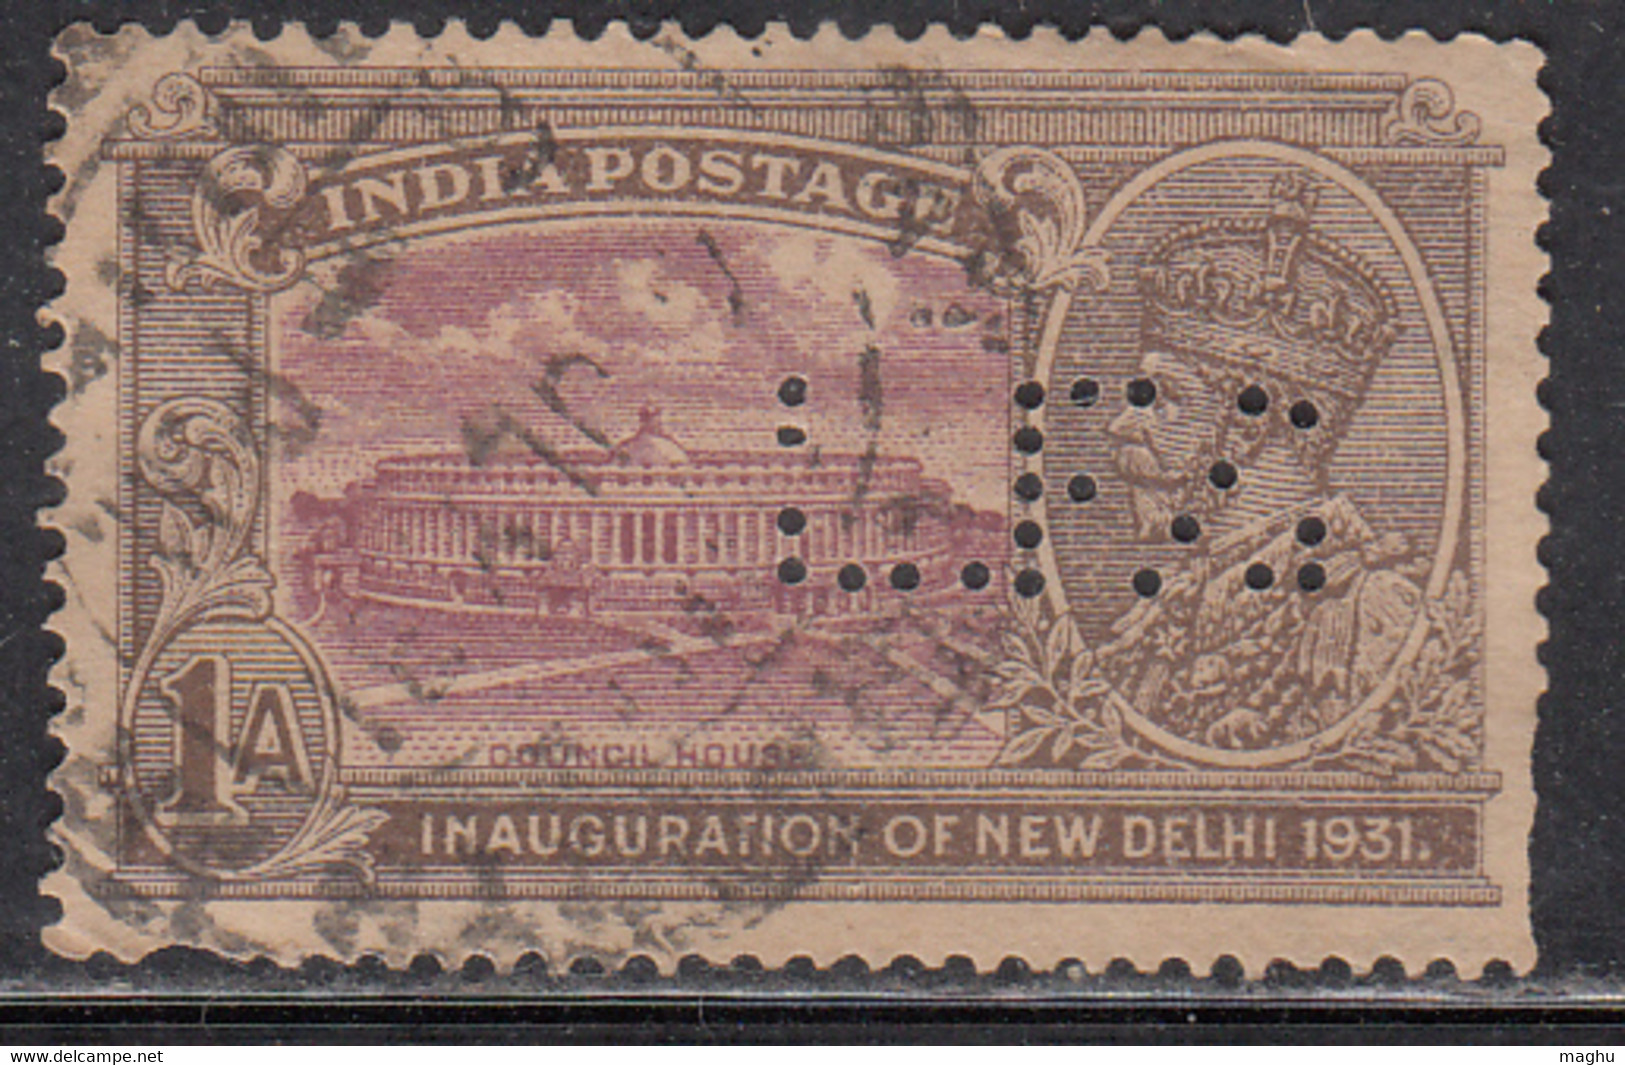 Perfin / Perfins  On 1a British India Used 1931 Inauguration - Perforiert/Gezähnt